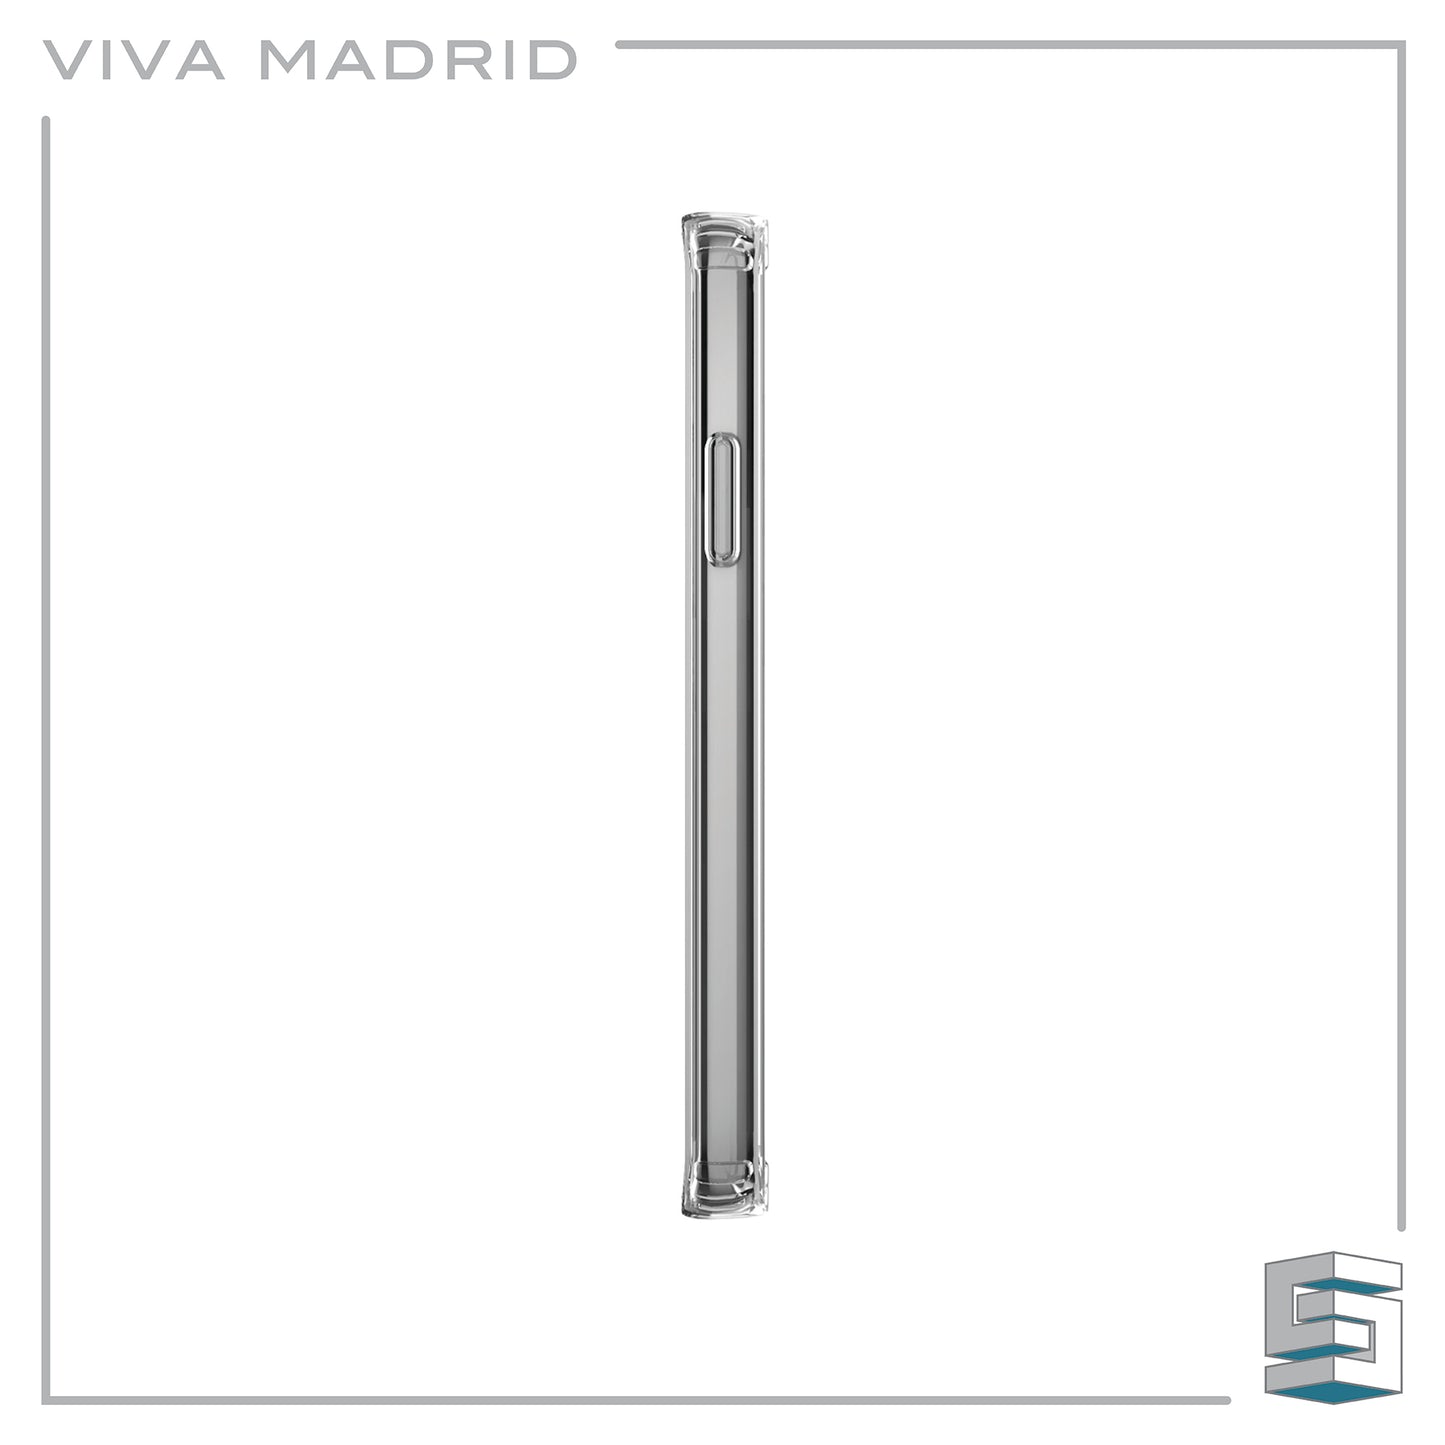 Case for iPhone 12 series - VIVA VANGUARD Halo Global Synergy Concepts